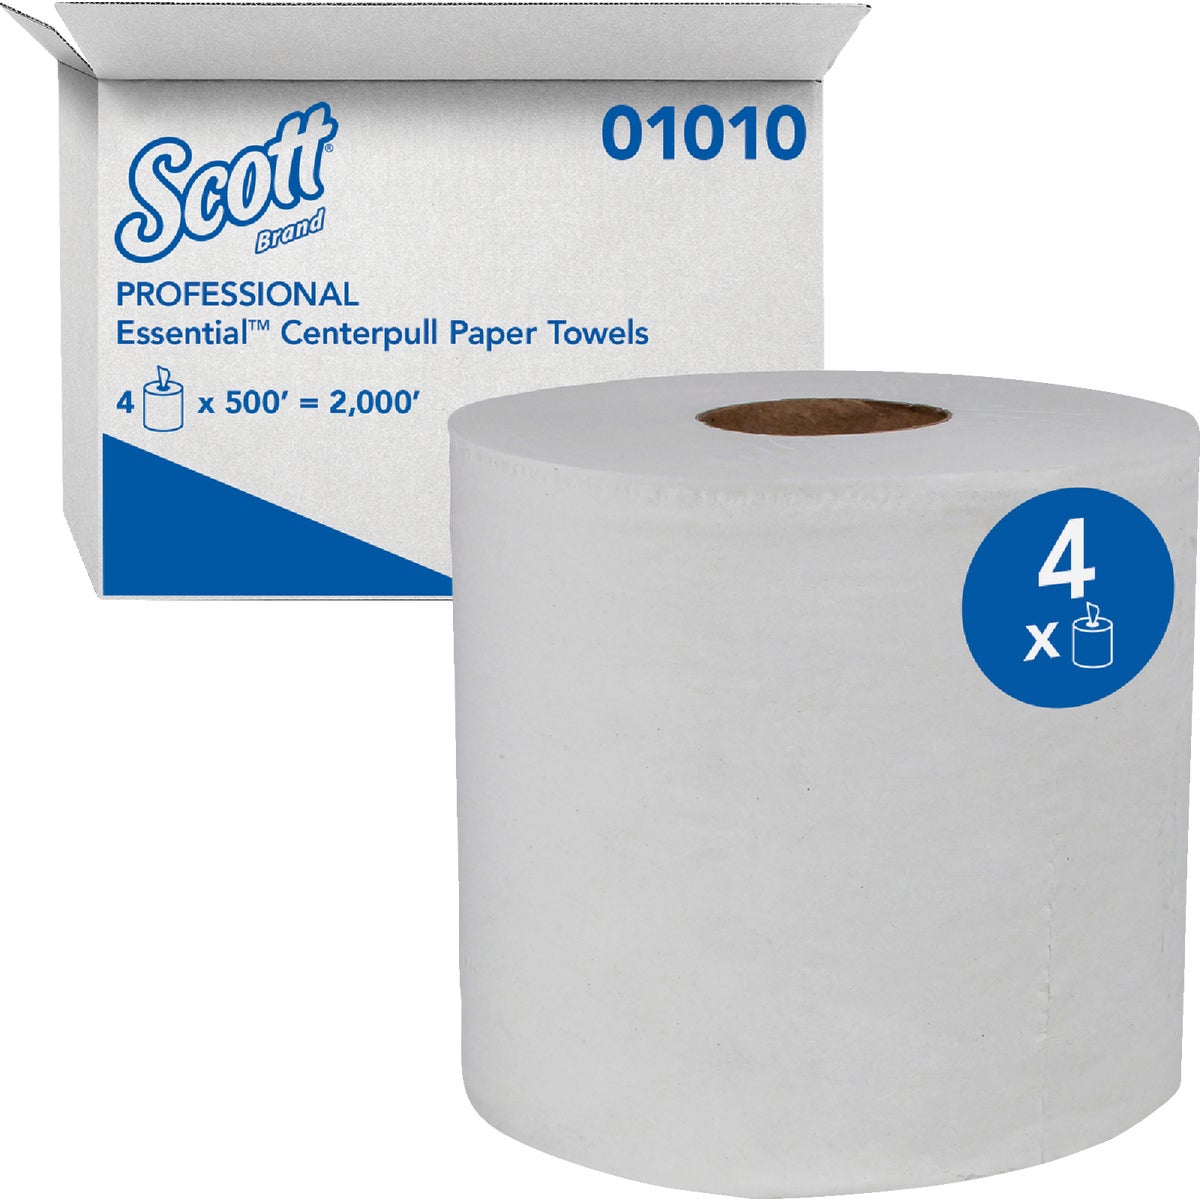 Item 629323, Center flow towels with UCTAD absorbency pockets.